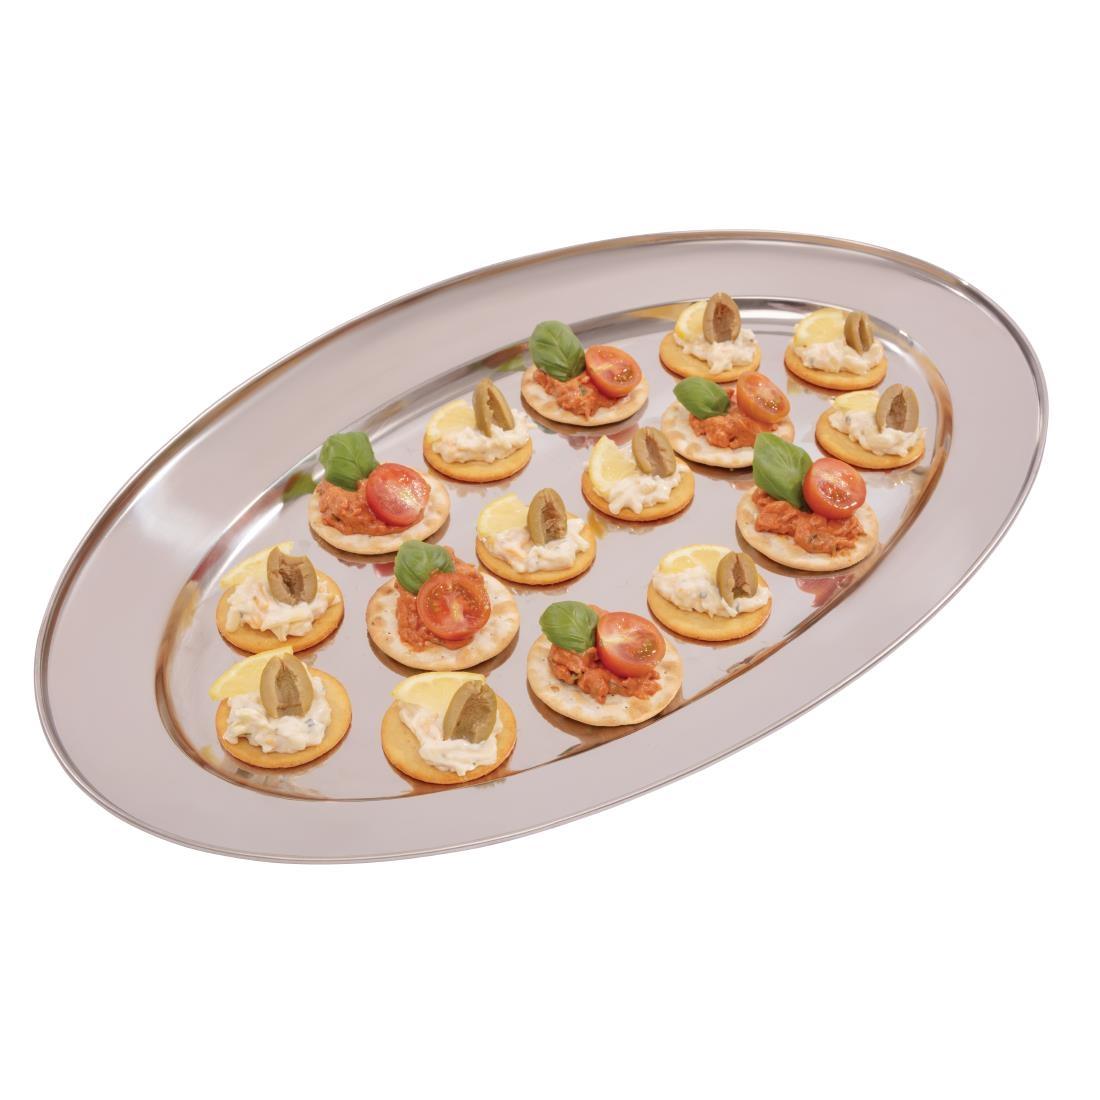 Olympia Stainless Steel Oval Serving Tray 550mm - K368  - 4